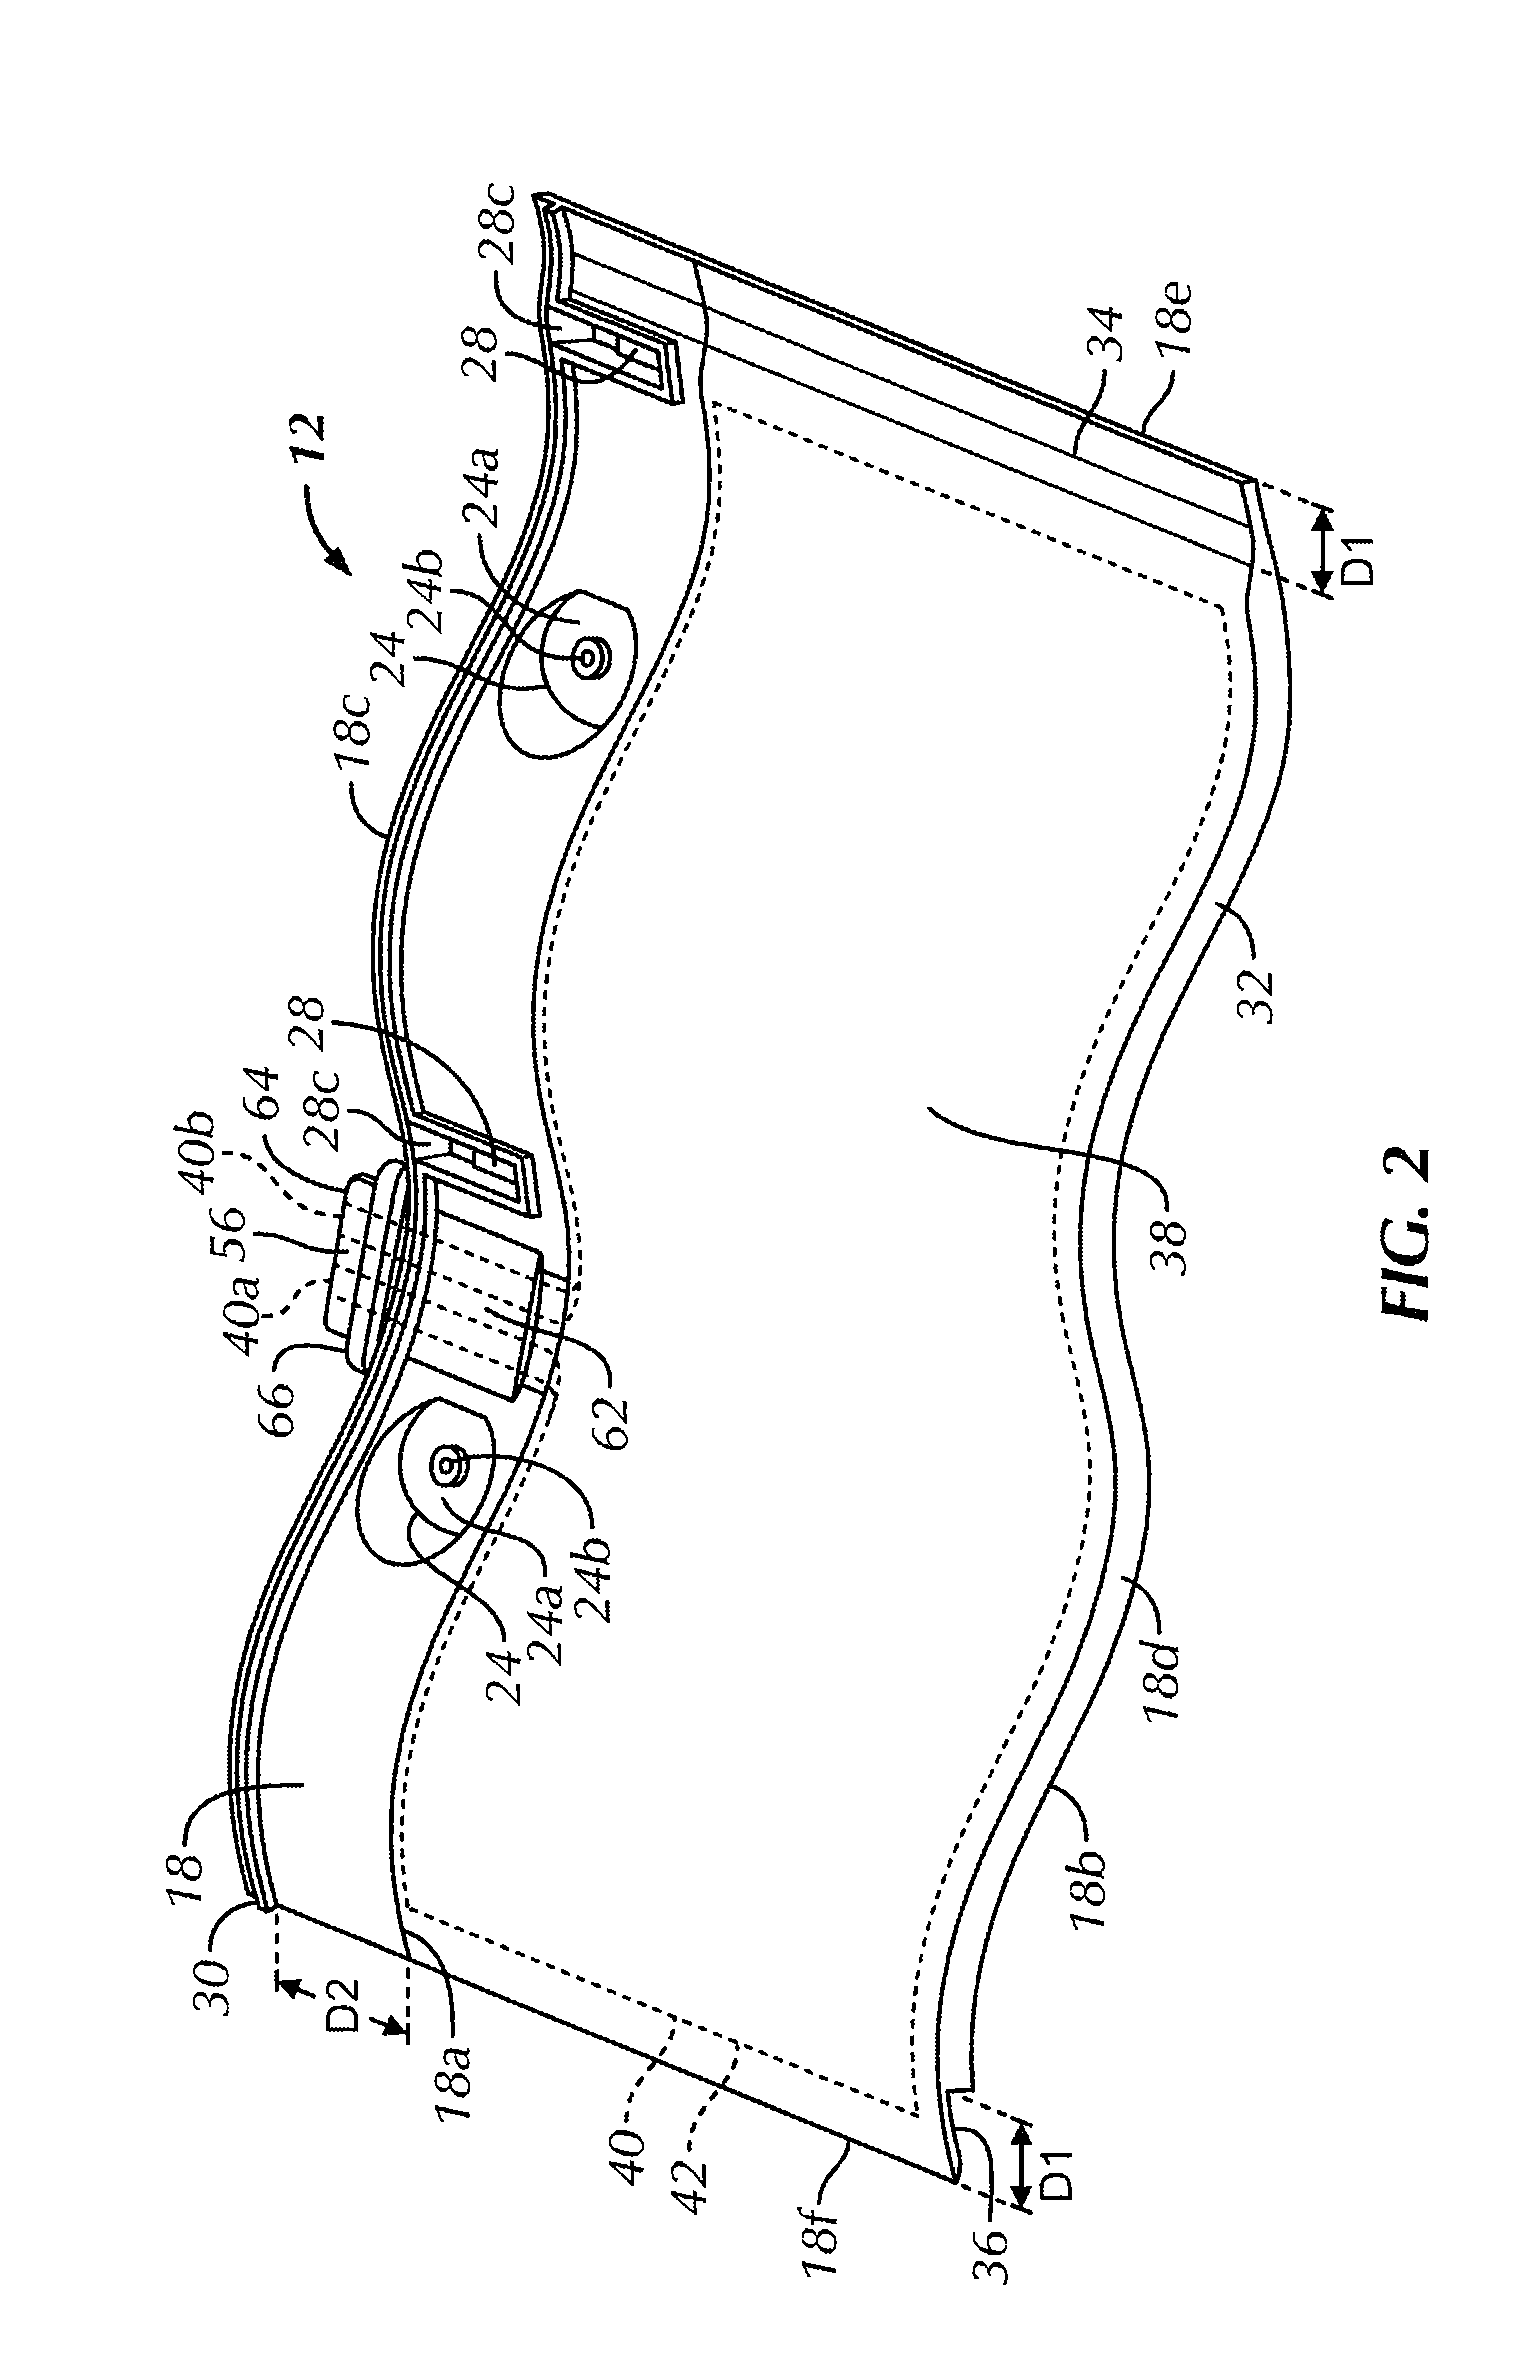 Integrated solar roofing tile connection system